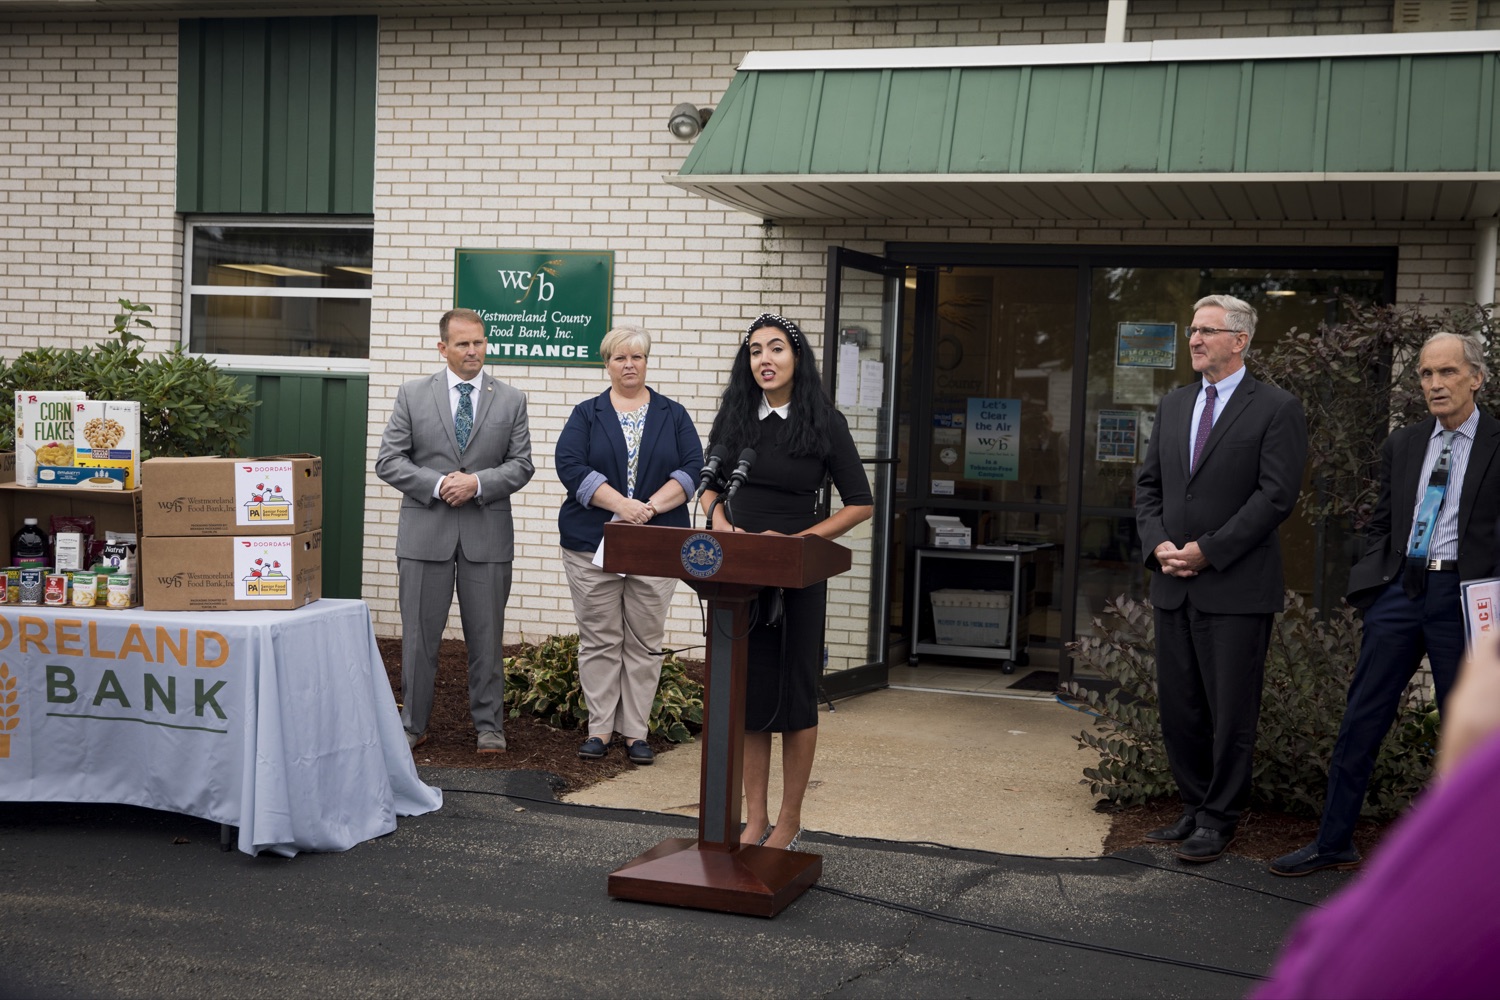 Second Lady of Pennsylvania Gisele Fetterman announces partnership with DoorDash to deliver meals to seniors in need, in Delmont, PA on September 23, 2021.<br><a href="https://filesource.amperwave.net/commonwealthofpa/photo/19091_ag_doordash_cz_05.jpg" target="_blank">⇣ Download Photo</a>